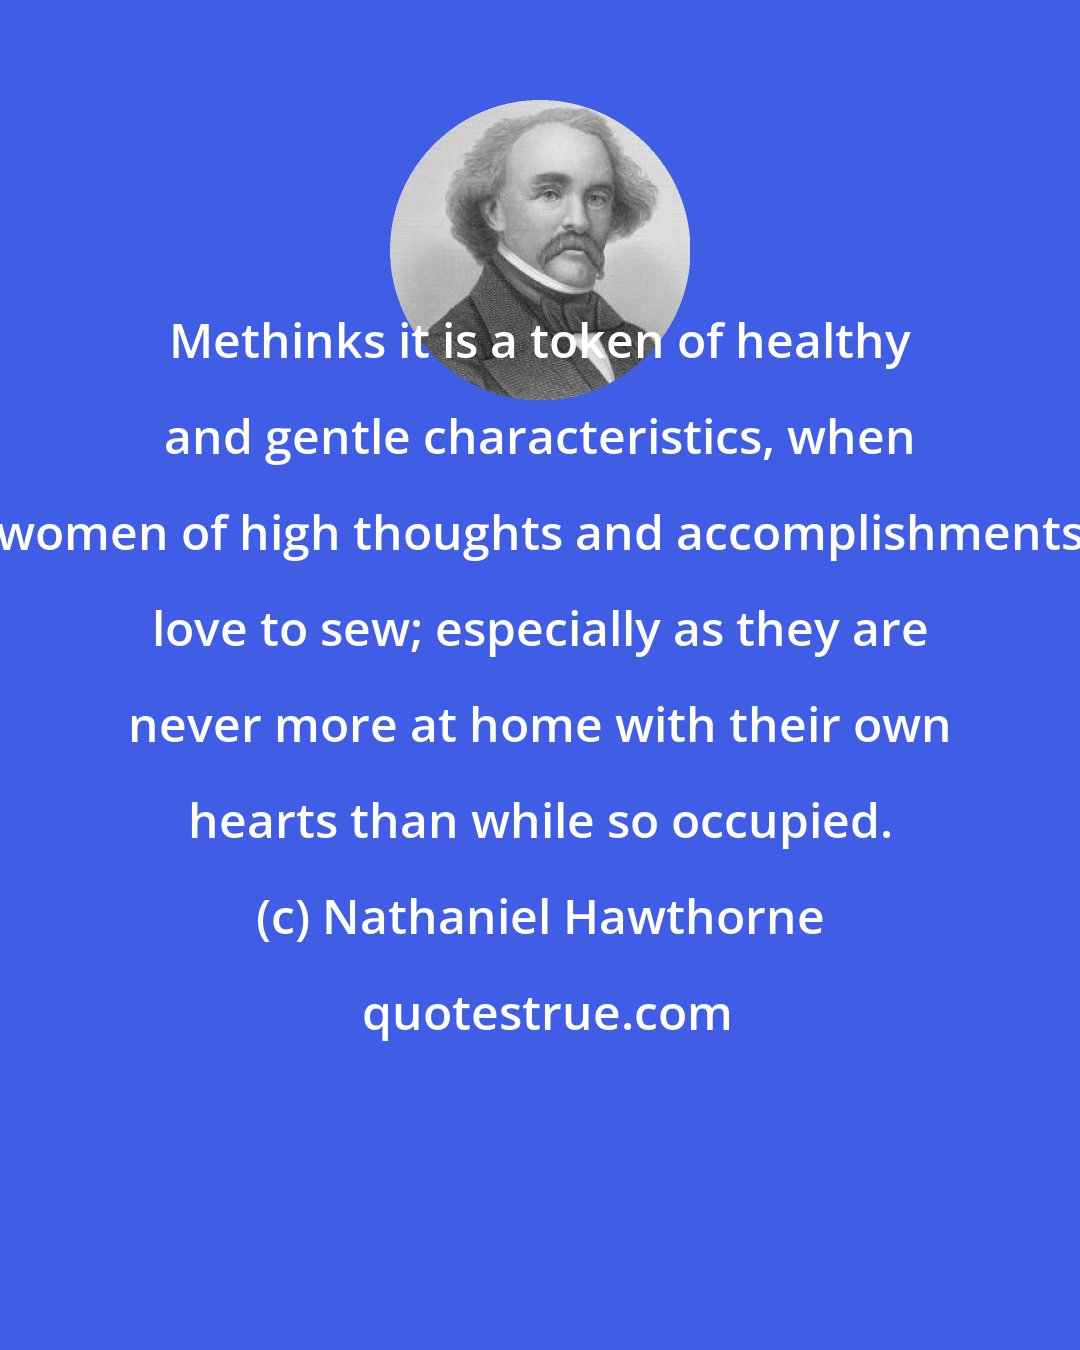 Nathaniel Hawthorne: Methinks it is a token of healthy and gentle characteristics, when women of high thoughts and accomplishments love to sew; especially as they are never more at home with their own hearts than while so occupied.